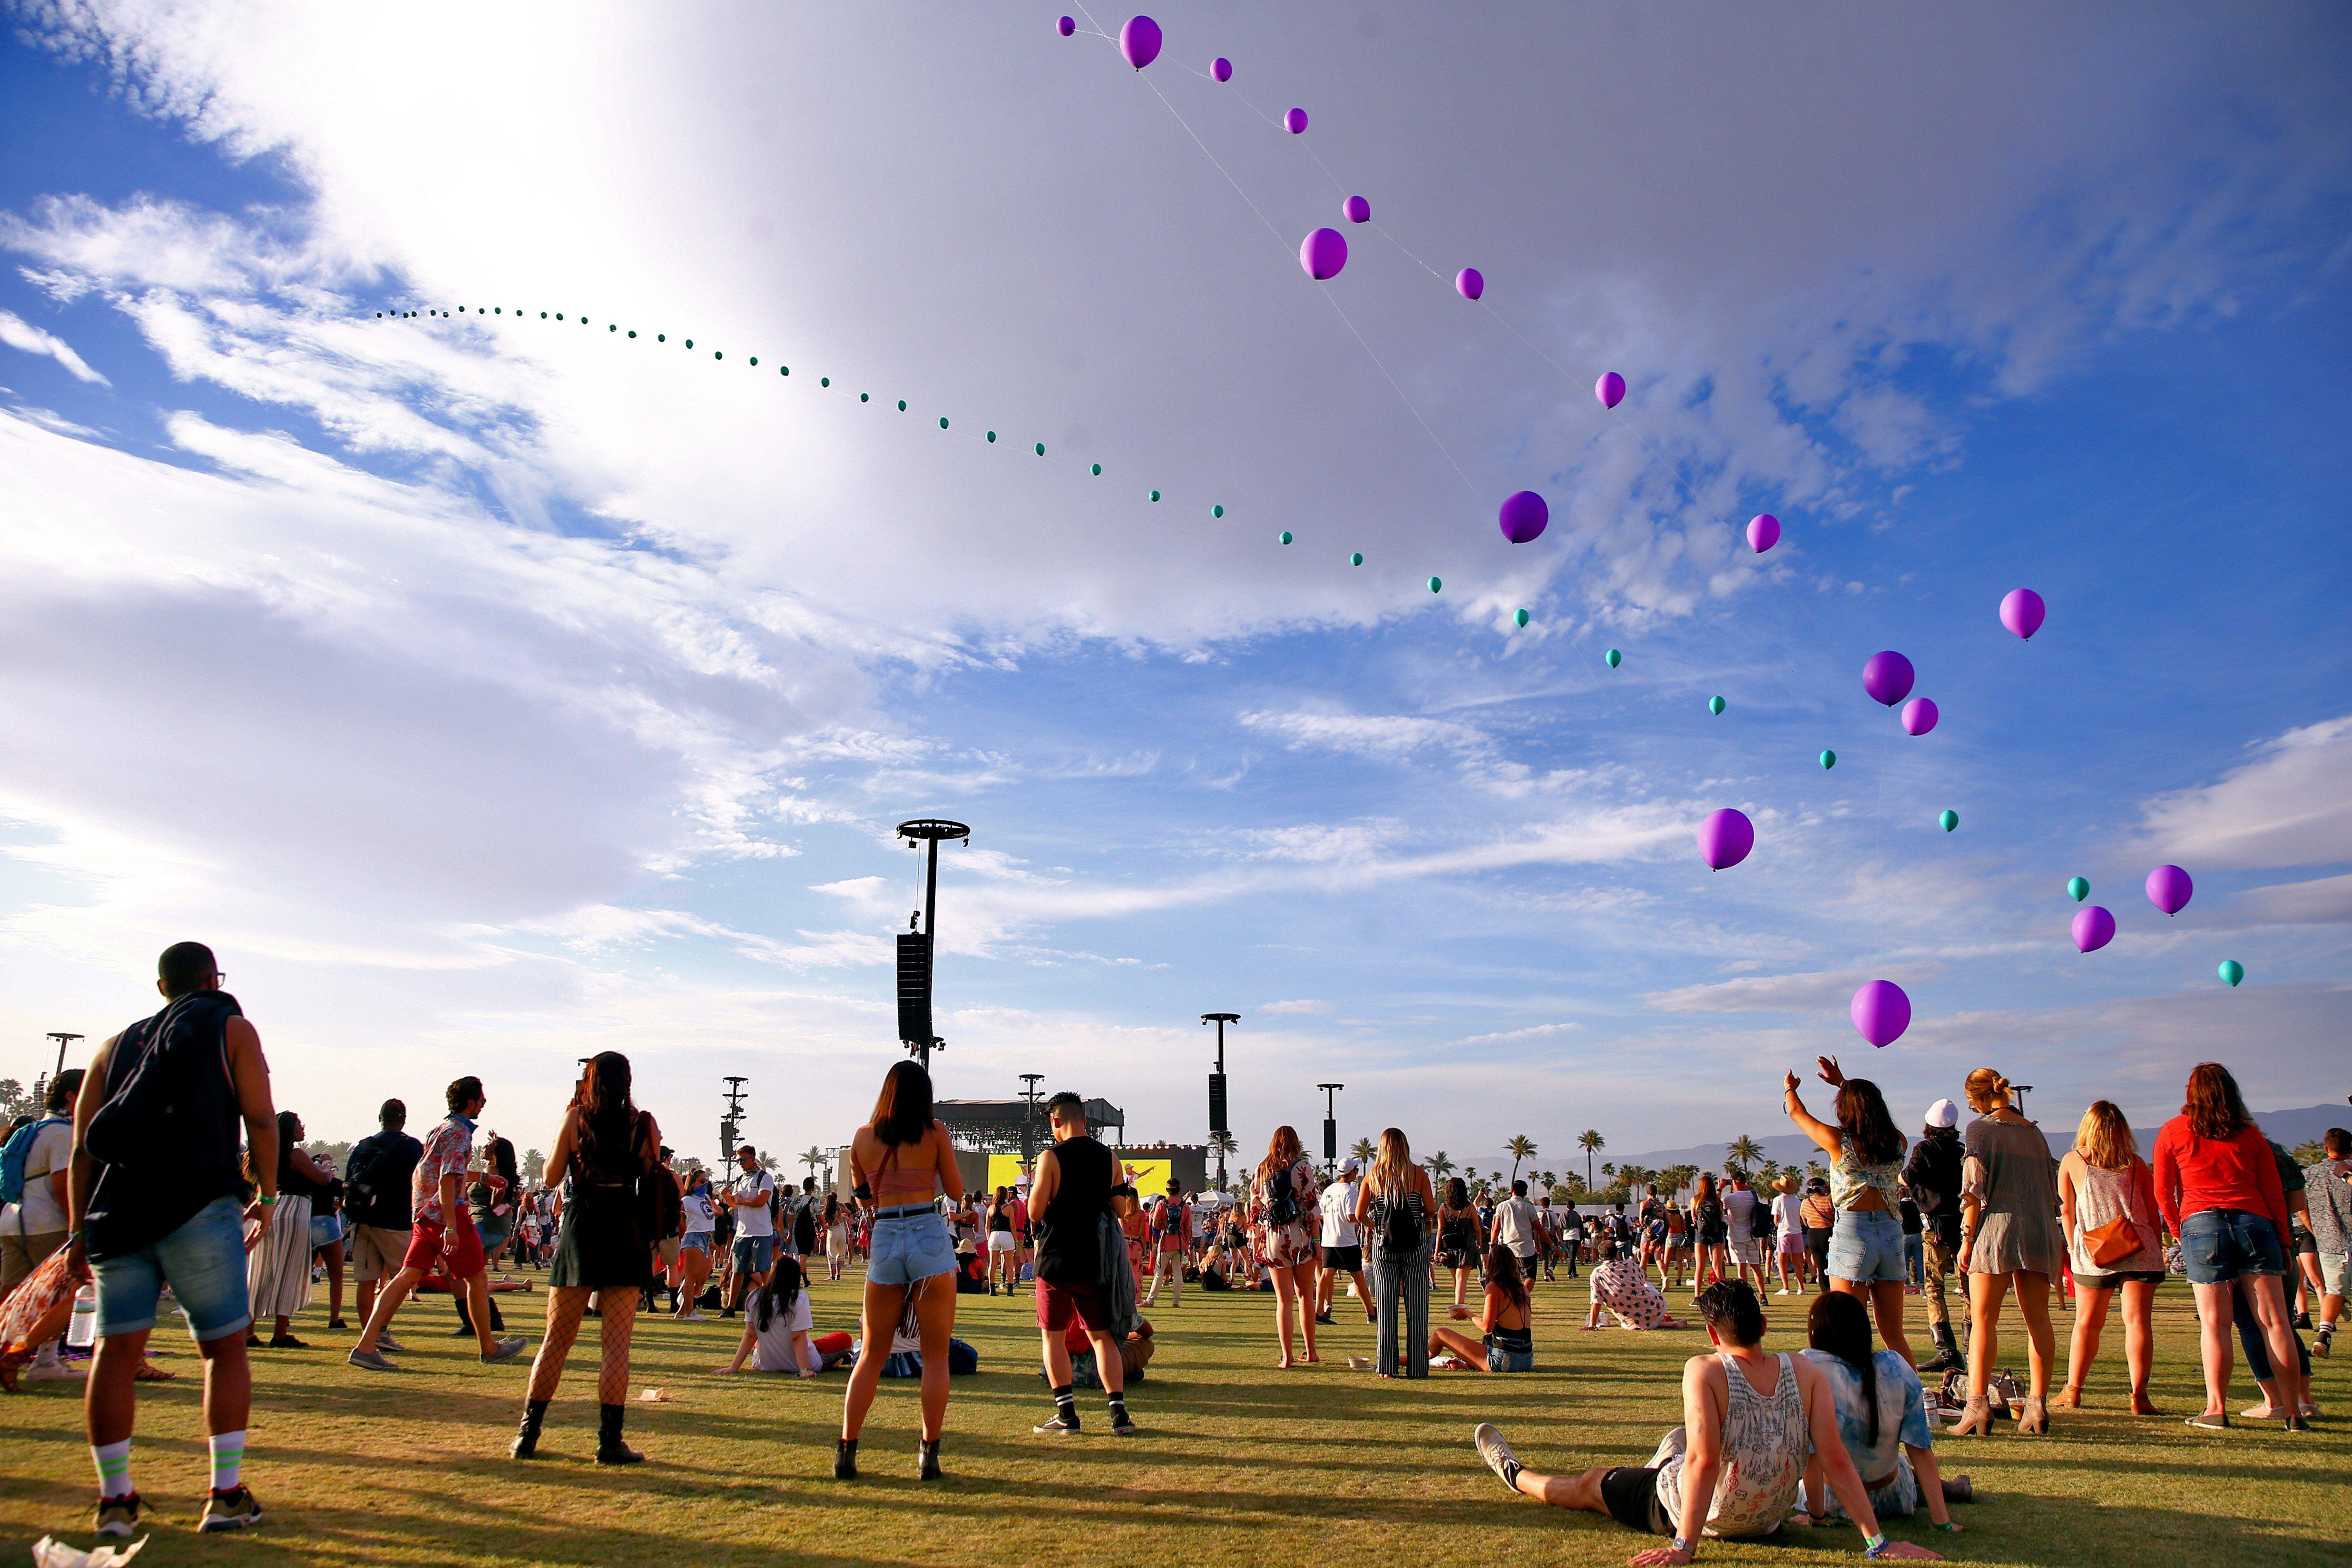 Coachella On Site Camping Delayed Due To High Winds; Festivalgoers